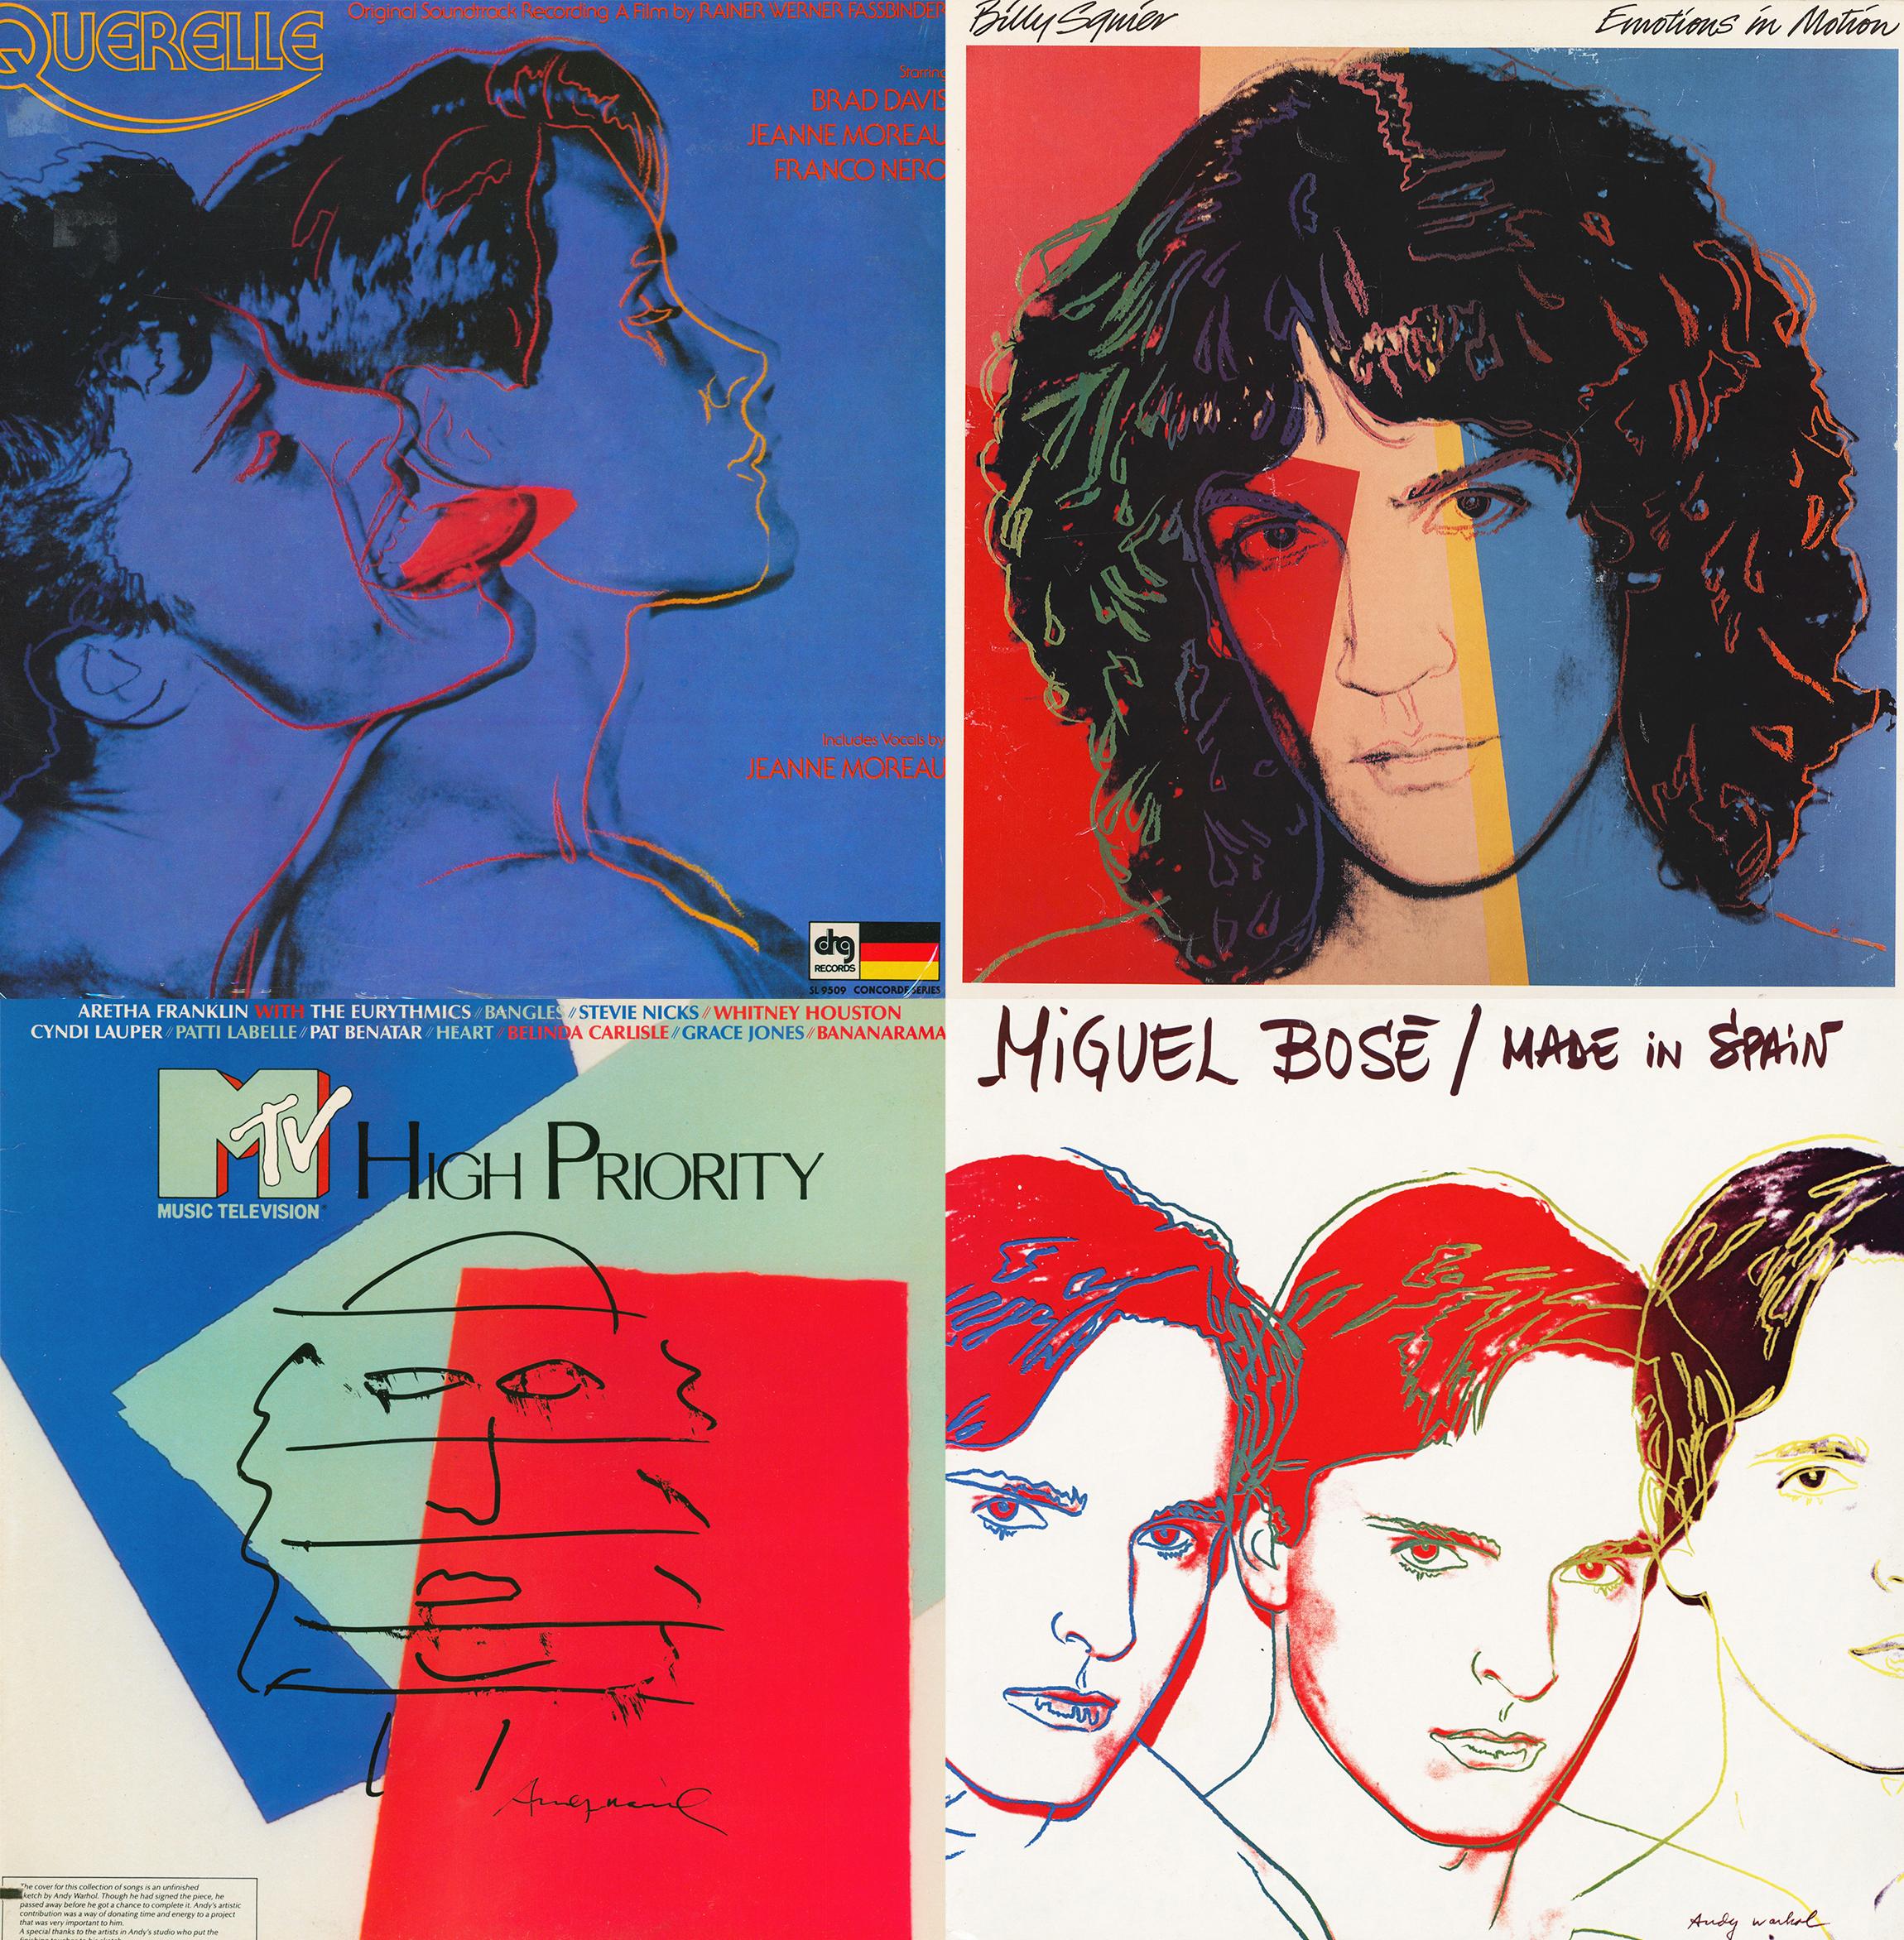 Andy Warhol album art:
A collection of 4 LPs with individual cover art designed by Andy Warhol between 1982-1987:

12 x 12 inches / 30.48 x 30.48 cm (applies to each individual).
Covers: Ranging from good to very good overall vintage